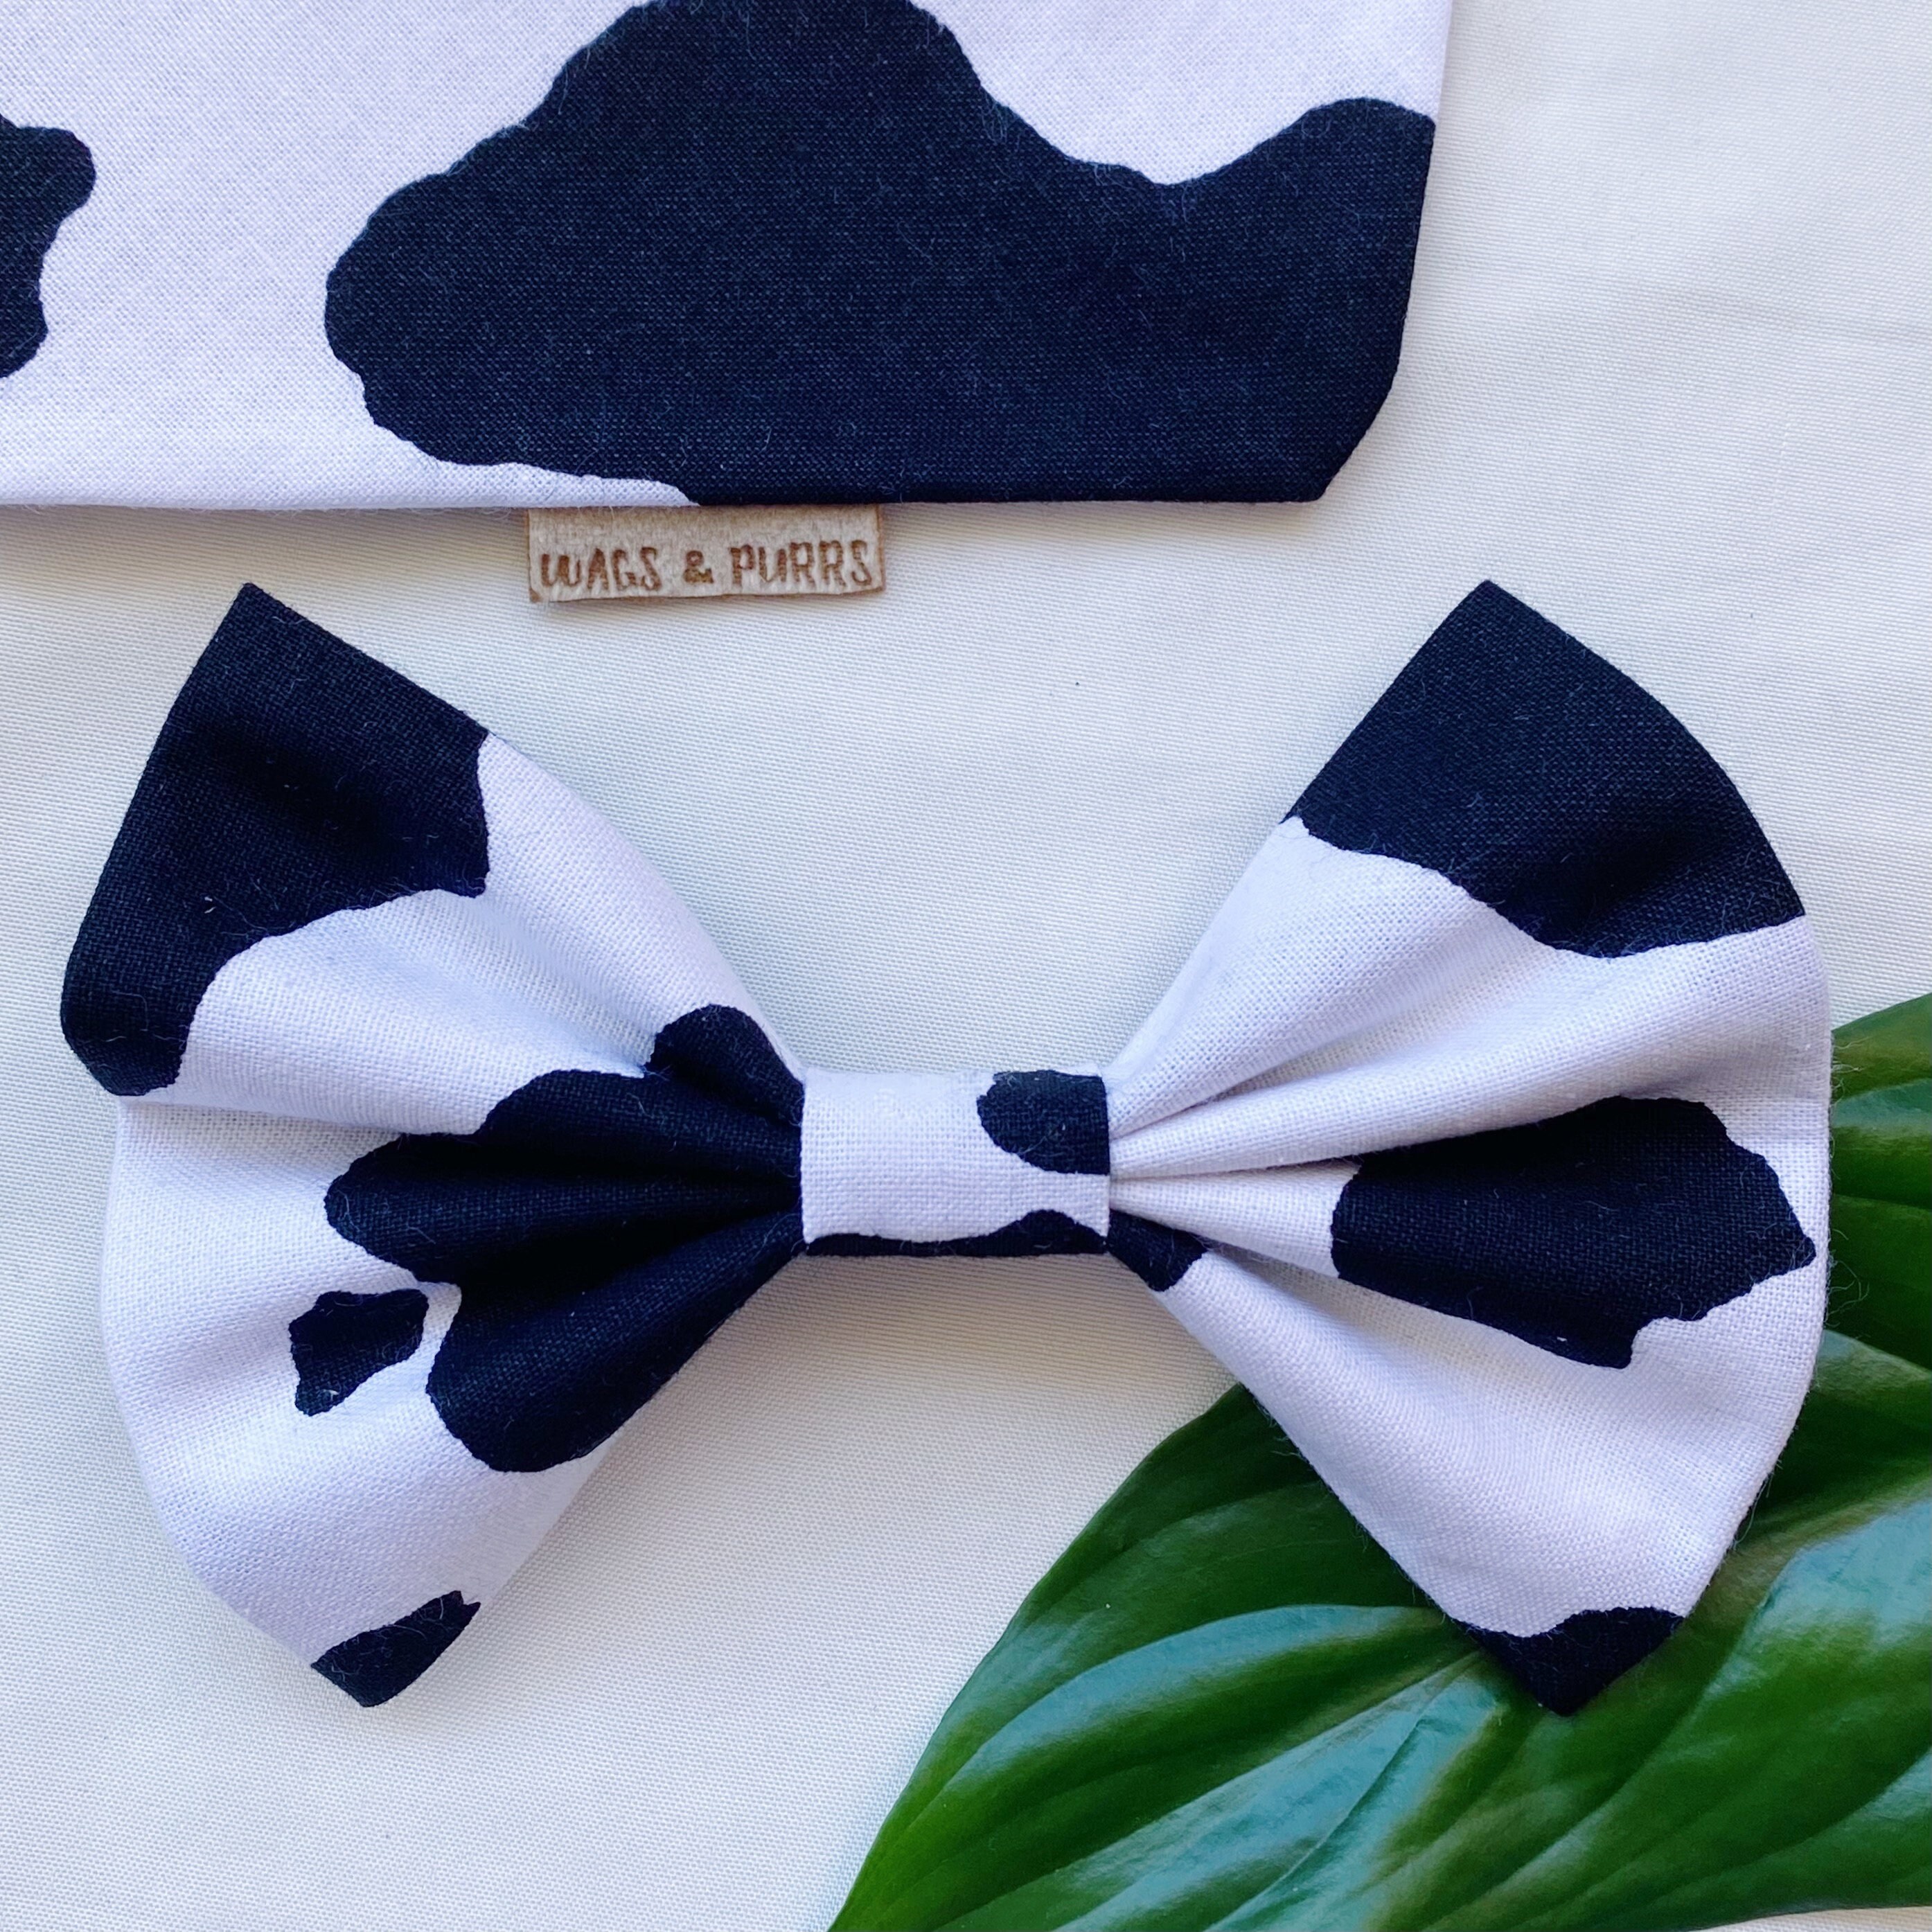 Bow Tie PNG - Blue Bow Tie, Black Bow Tie, Bow Tie Black, Baby Bow Tie, Bow  Tie Silhouette, Bow Tie Outline, Plaid Bow Tie, Chevy Bow Tie, Bow Tie  Graphic, Navy